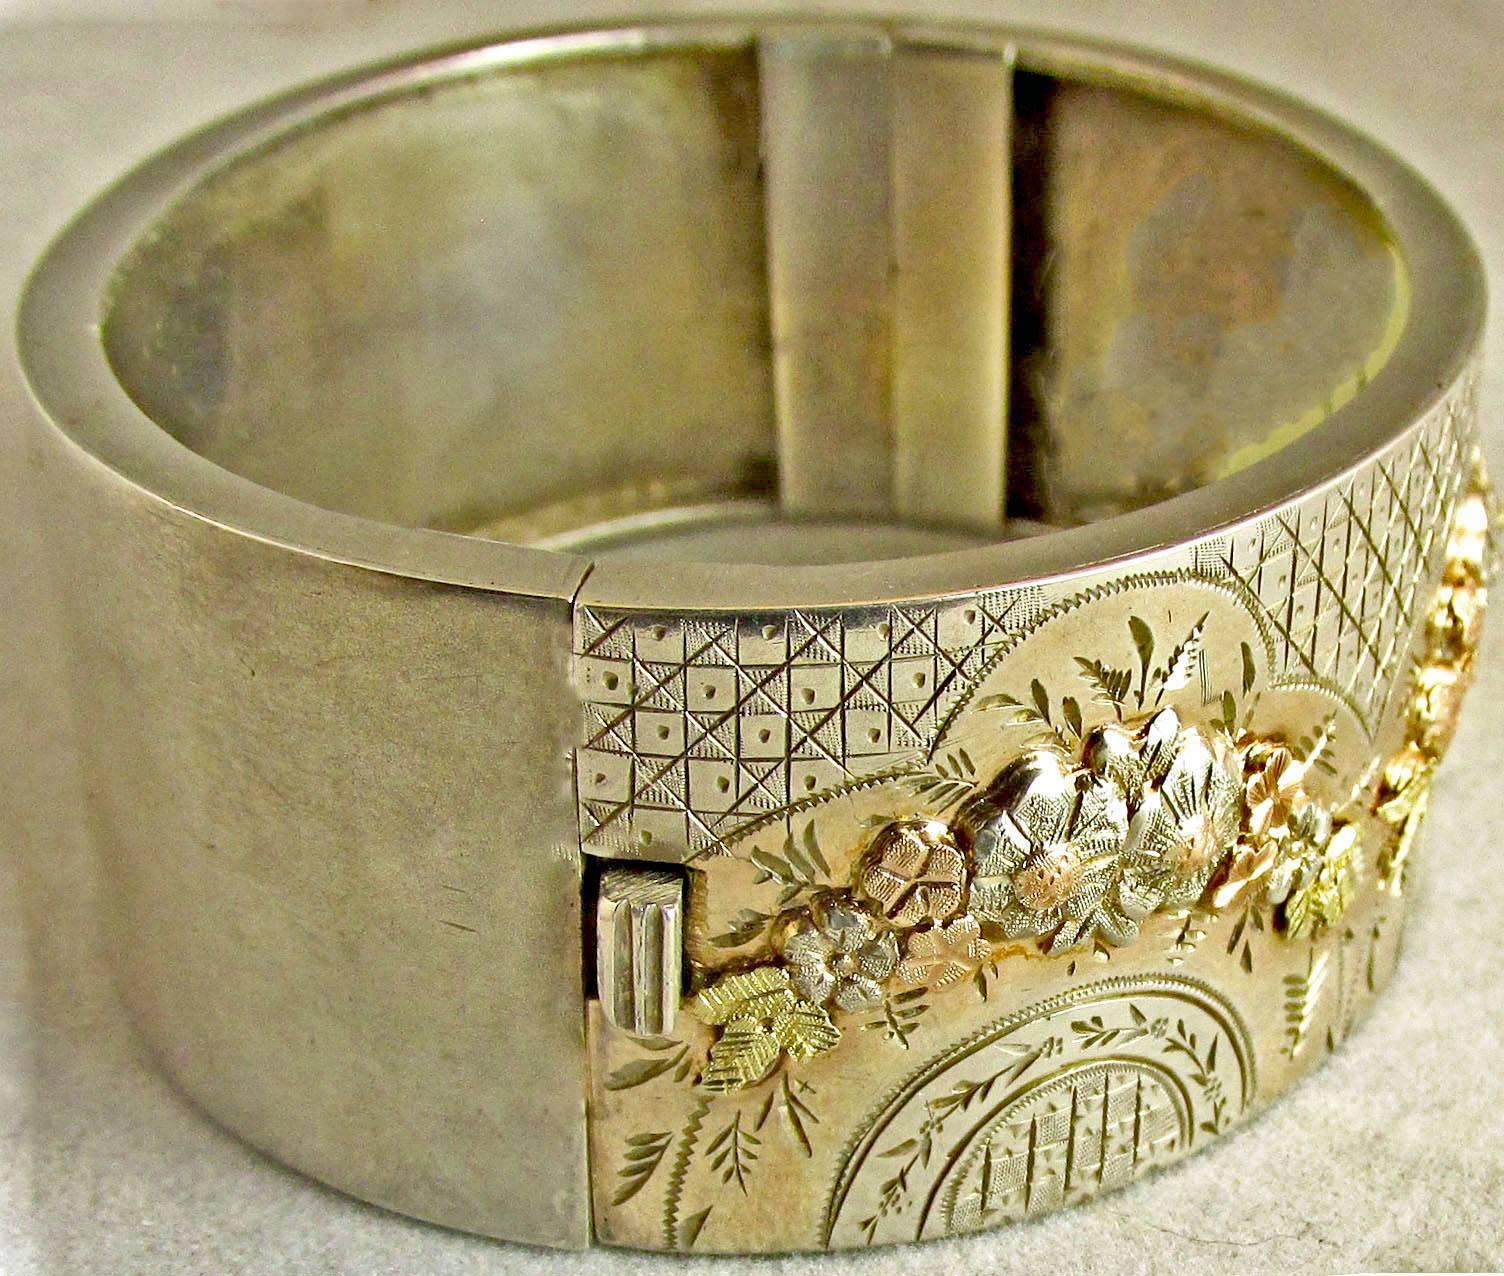 Antique Silver Two Color Gold Floral Motif Bangle Bracelet In Excellent Condition For Sale In Baltimore, MD